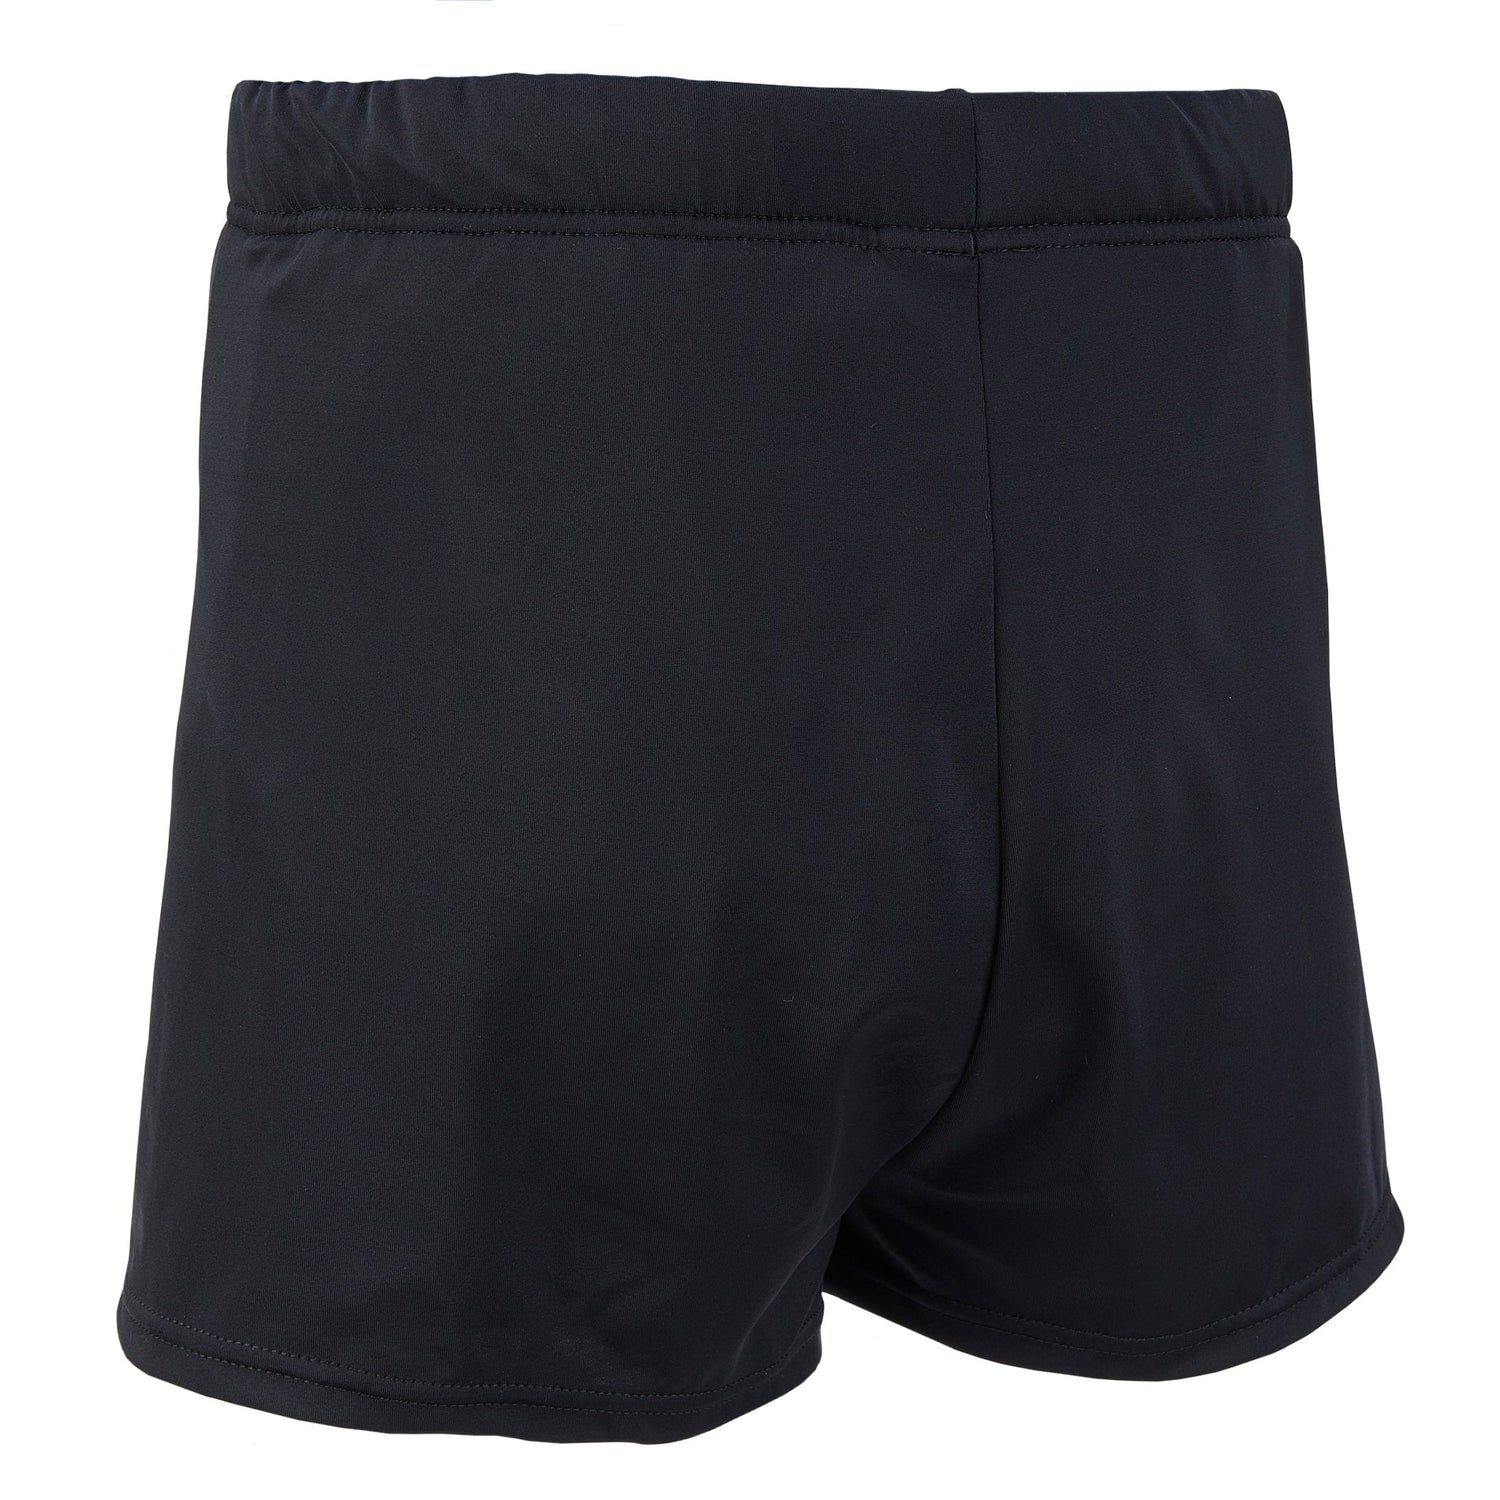 Black swim shorts with tie cord on the waist.